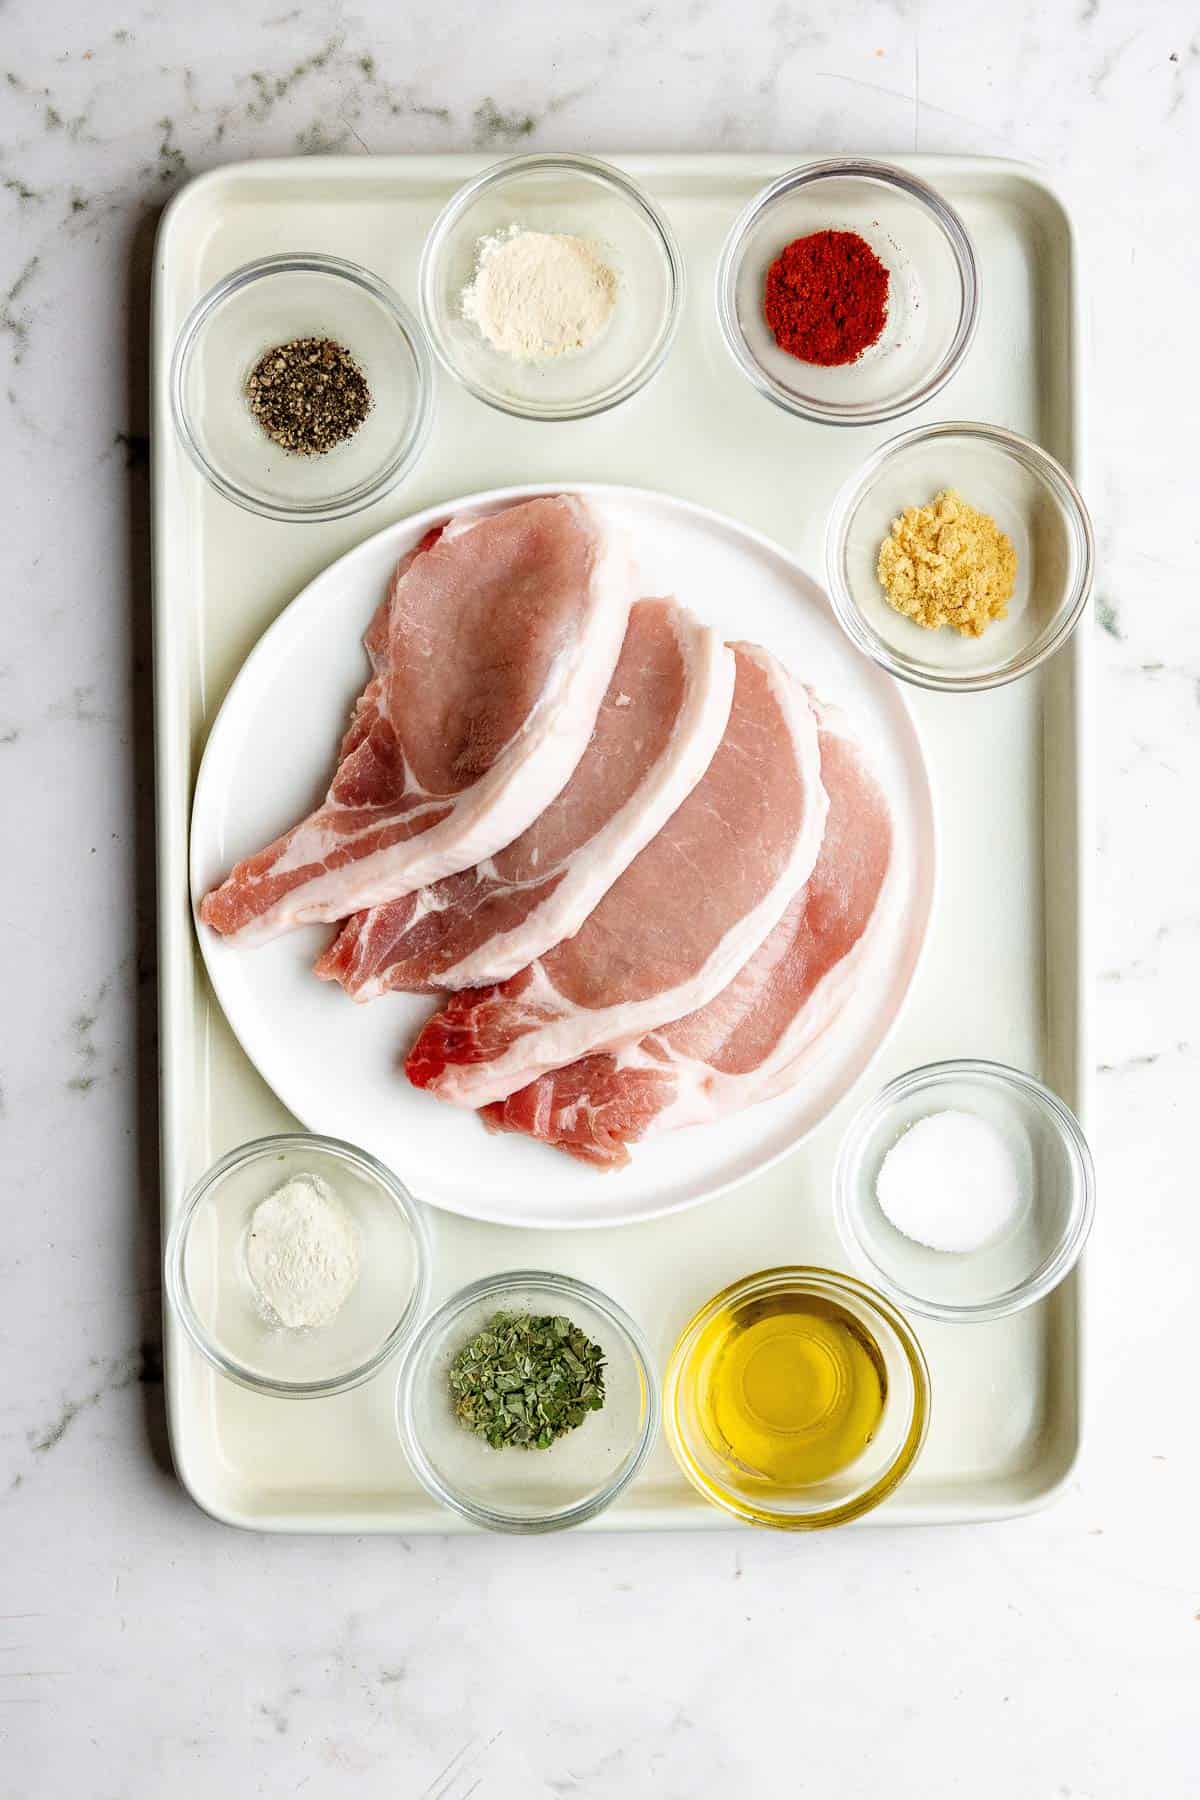 A tray with pork chops and seasonings on it.